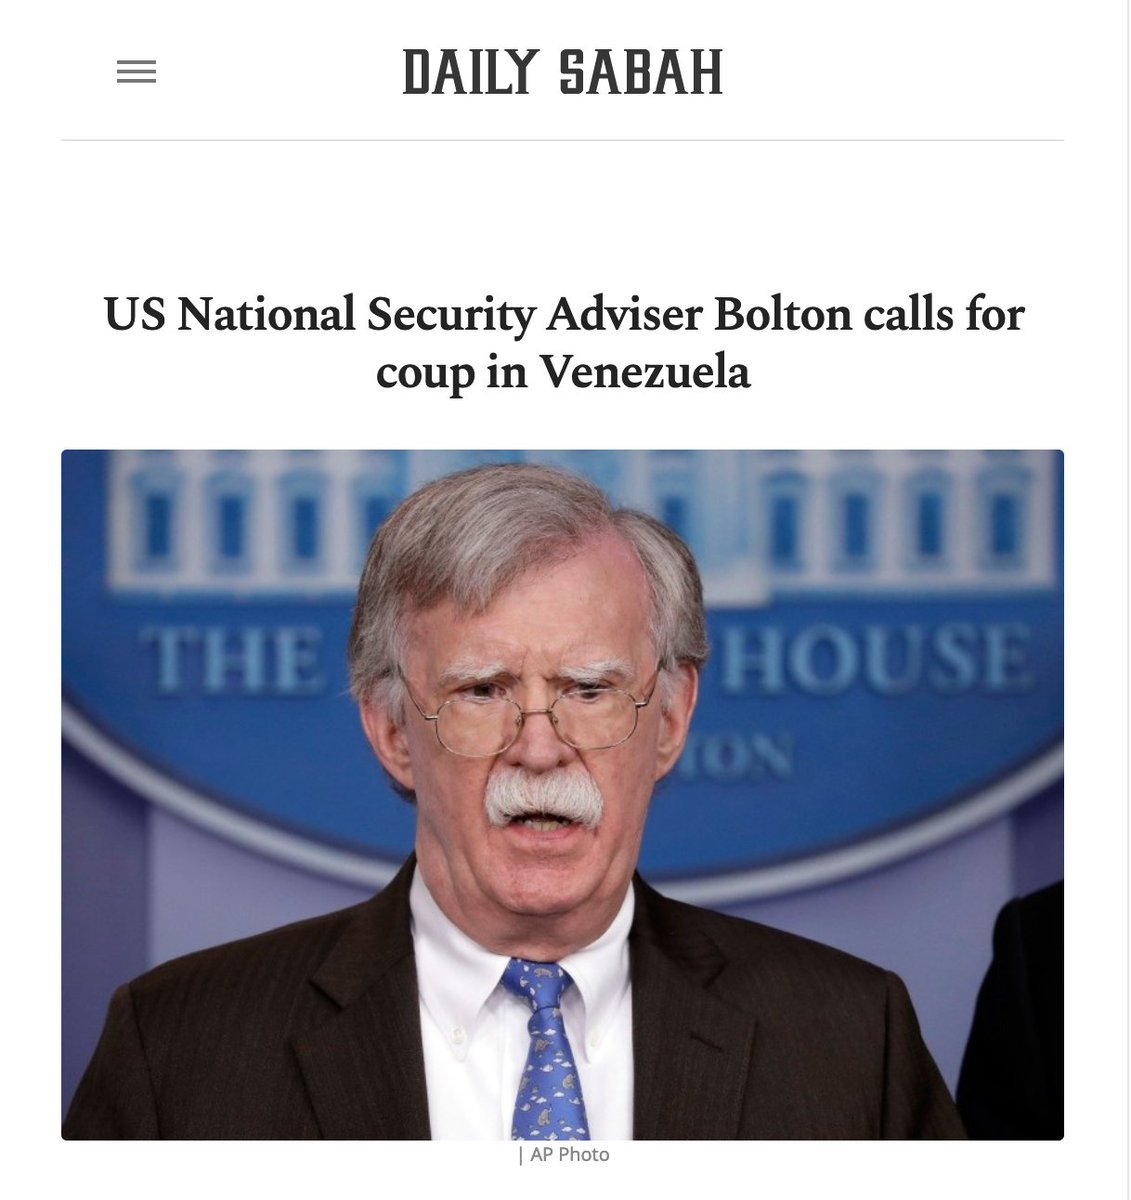 Since John Bolton is floating the idea of running for president, it's important as many people as possible know how much of a genocidal ghoul he really is.